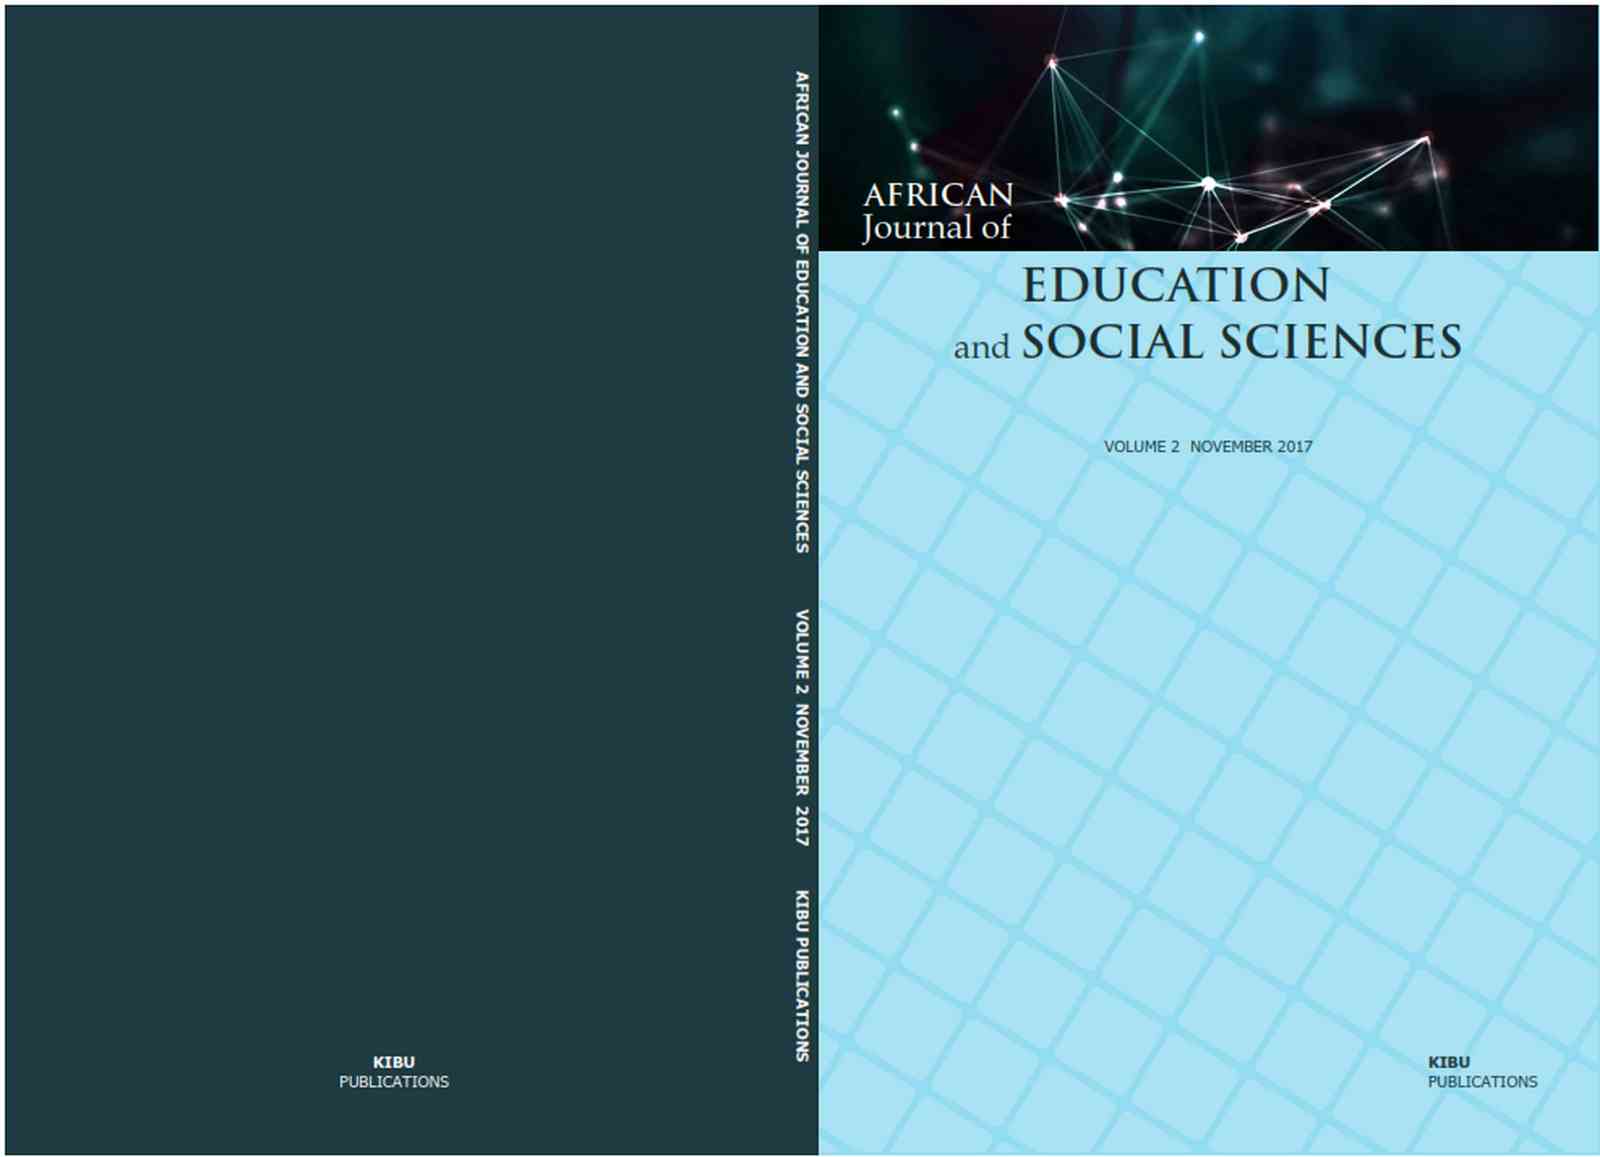 African Journal of Education and Social Sciences (AJESS) Publications 2017